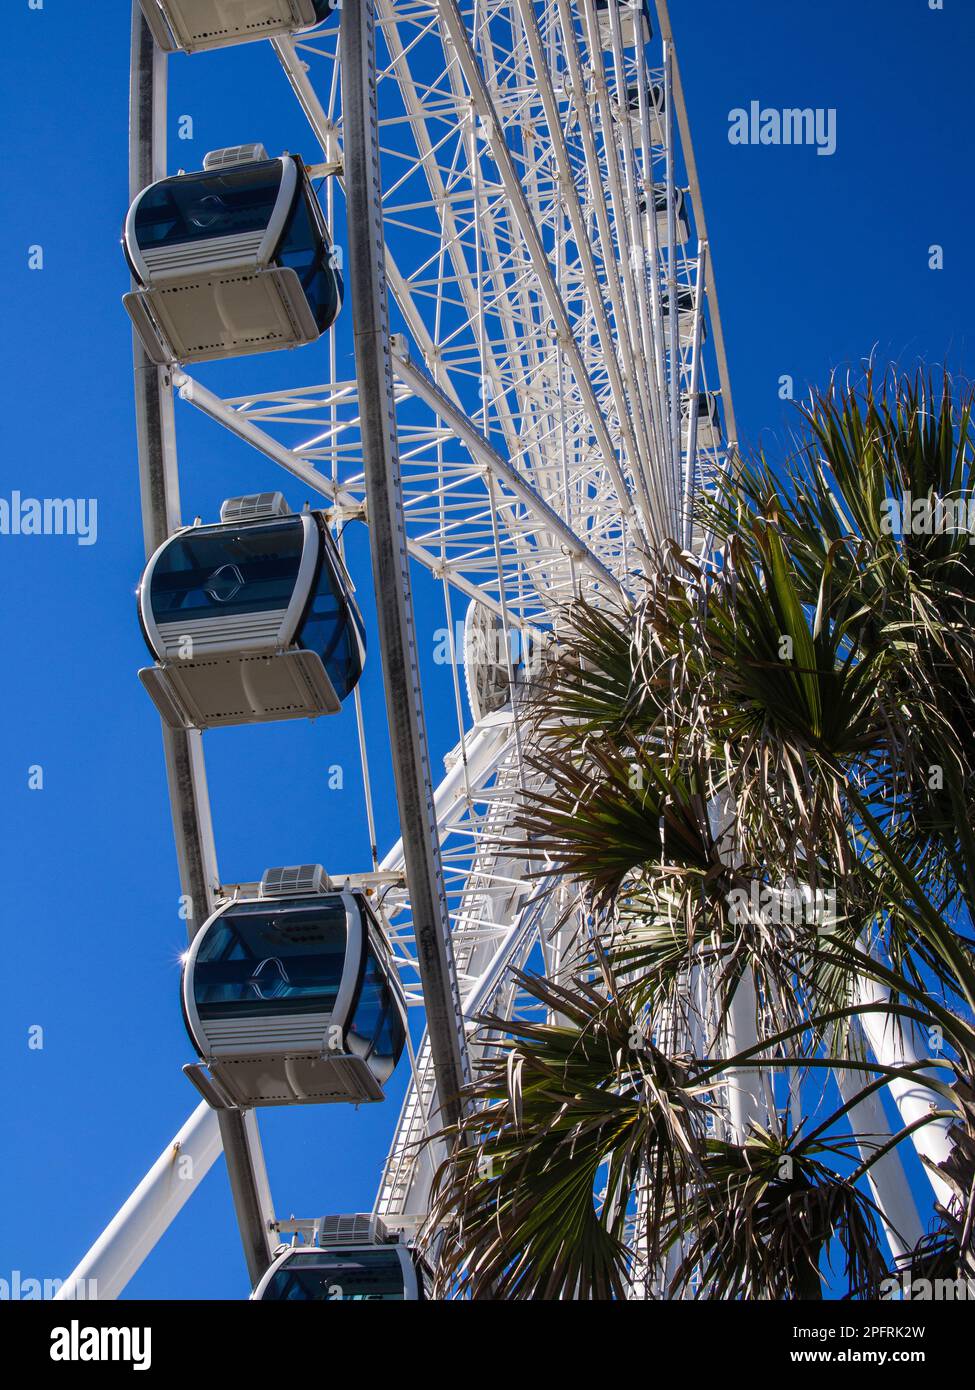 The Myrtle Beach Skywheel Is A 187 Foot Tall Observation Wheel Located In Myrtle Beach South